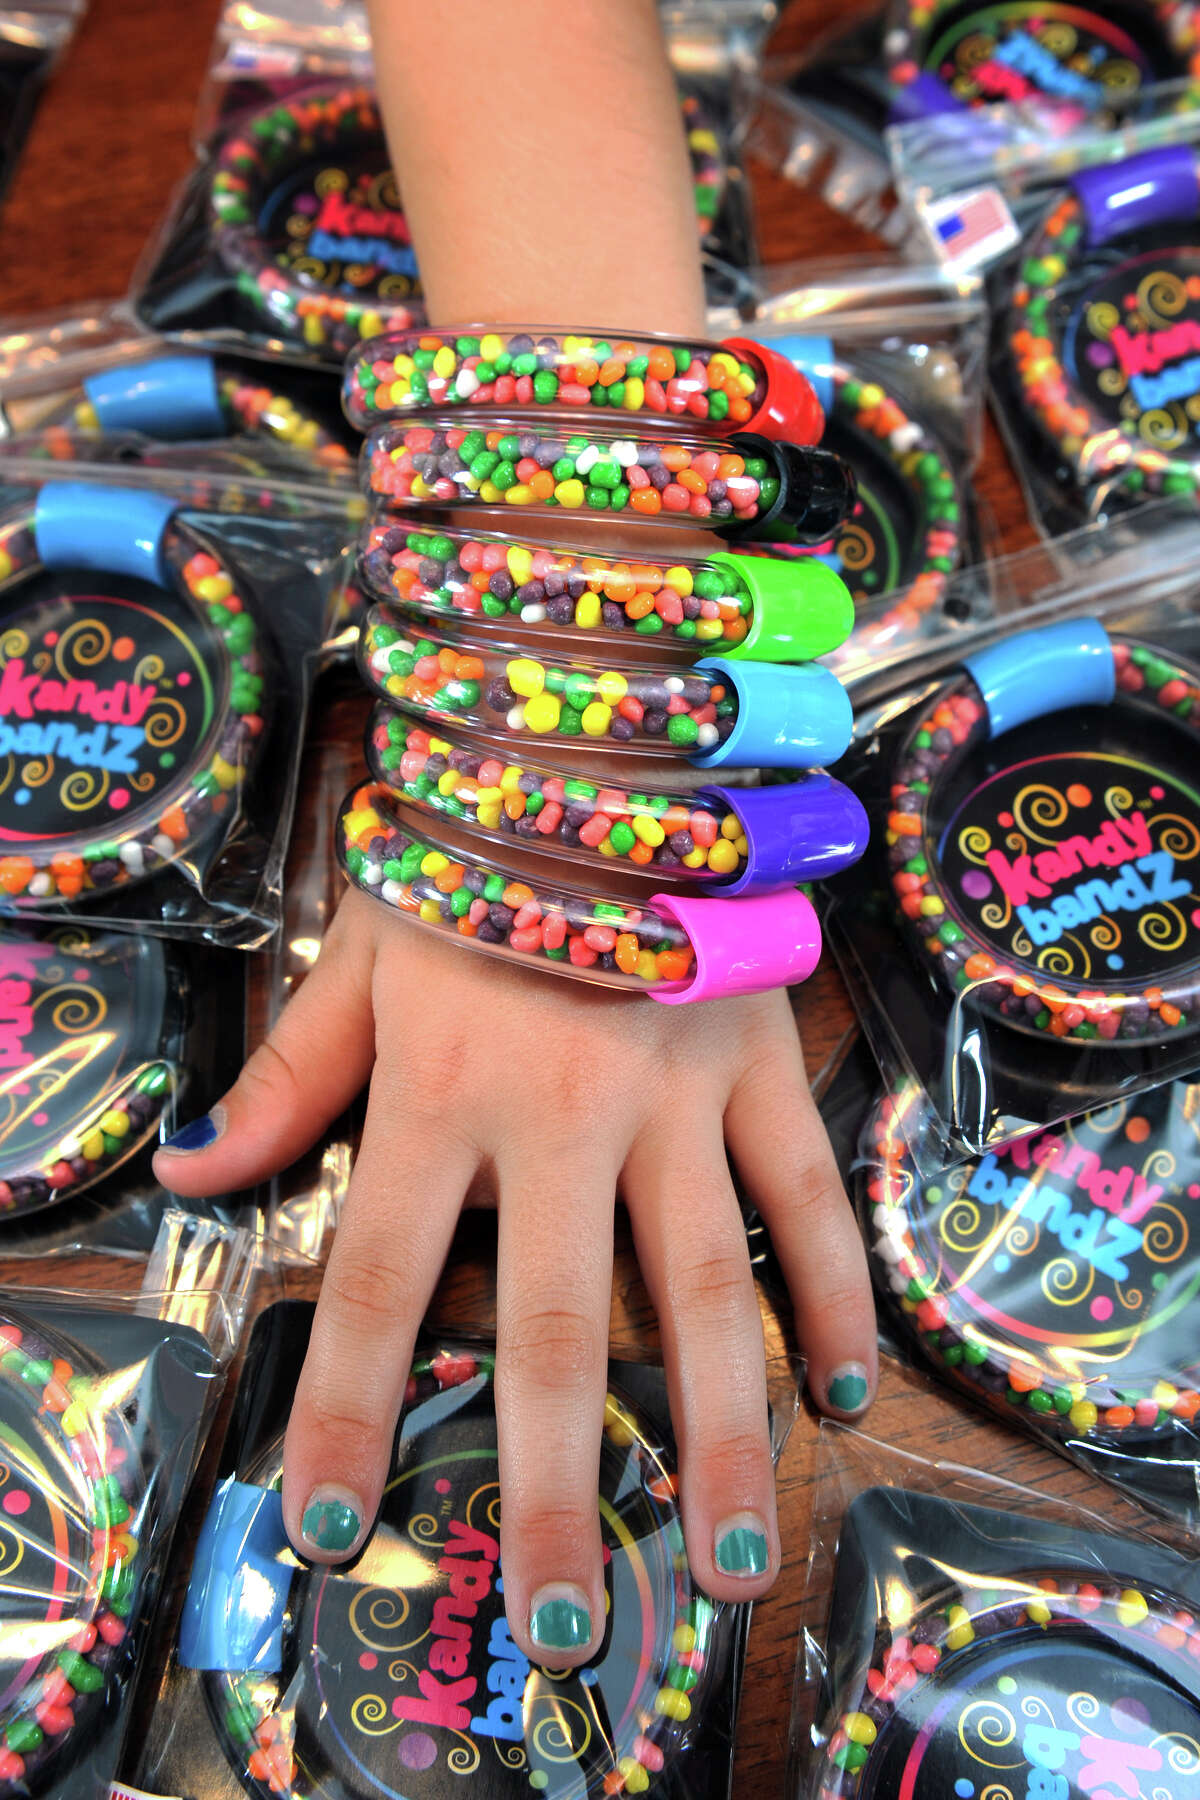 Samantha Sperrazza models several of her ìkandy bandZî, the clear plastic bracelets filled with candy that she invented and debuted at the recent Invention Convention, in Danbury, Conn. July 16, 2014. She now has a patent pending on the bracelets, which are for sale at area businesses.